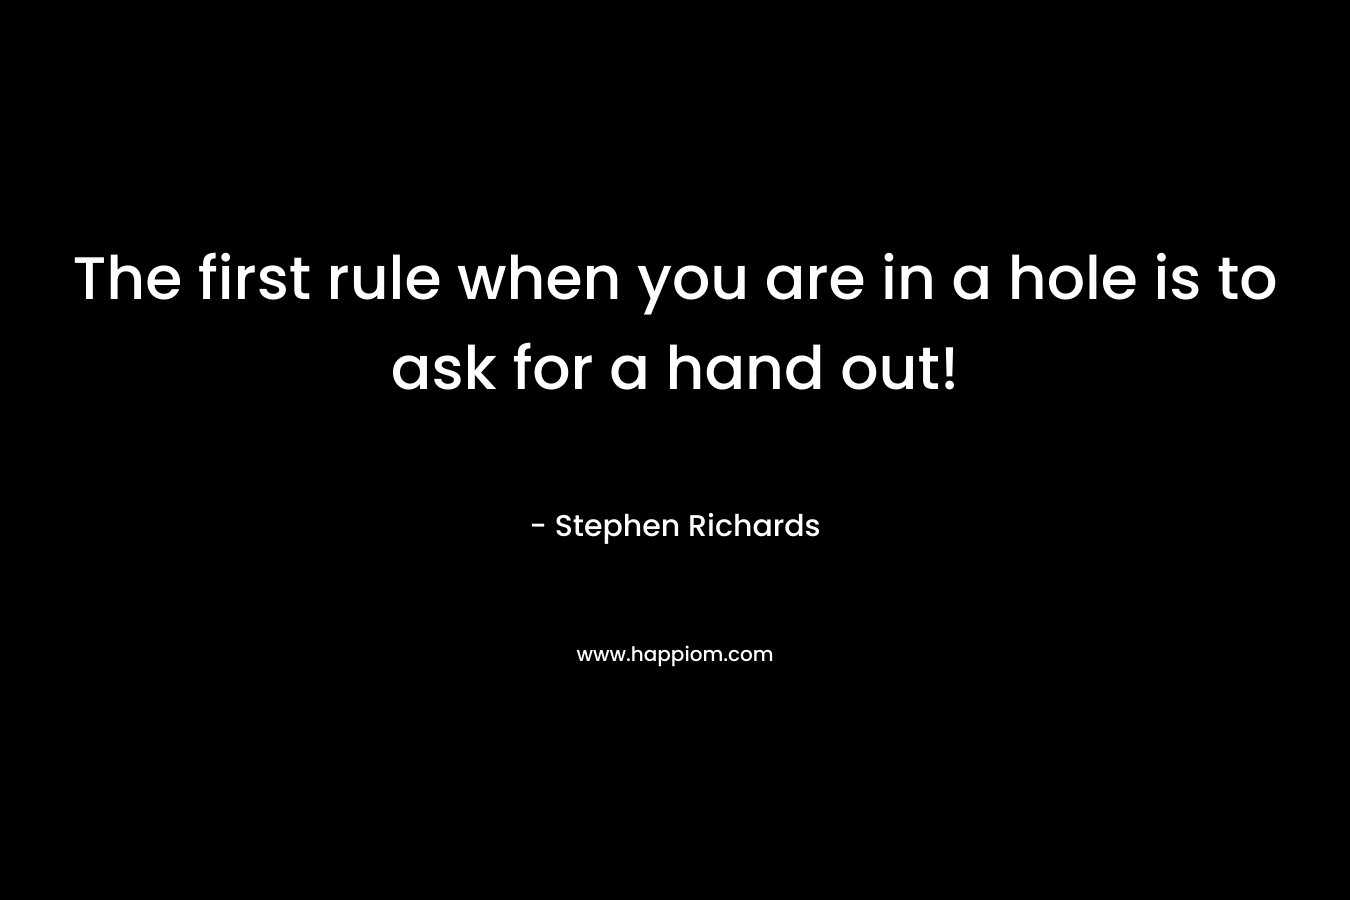 The first rule when you are in a hole is to ask for a hand out!